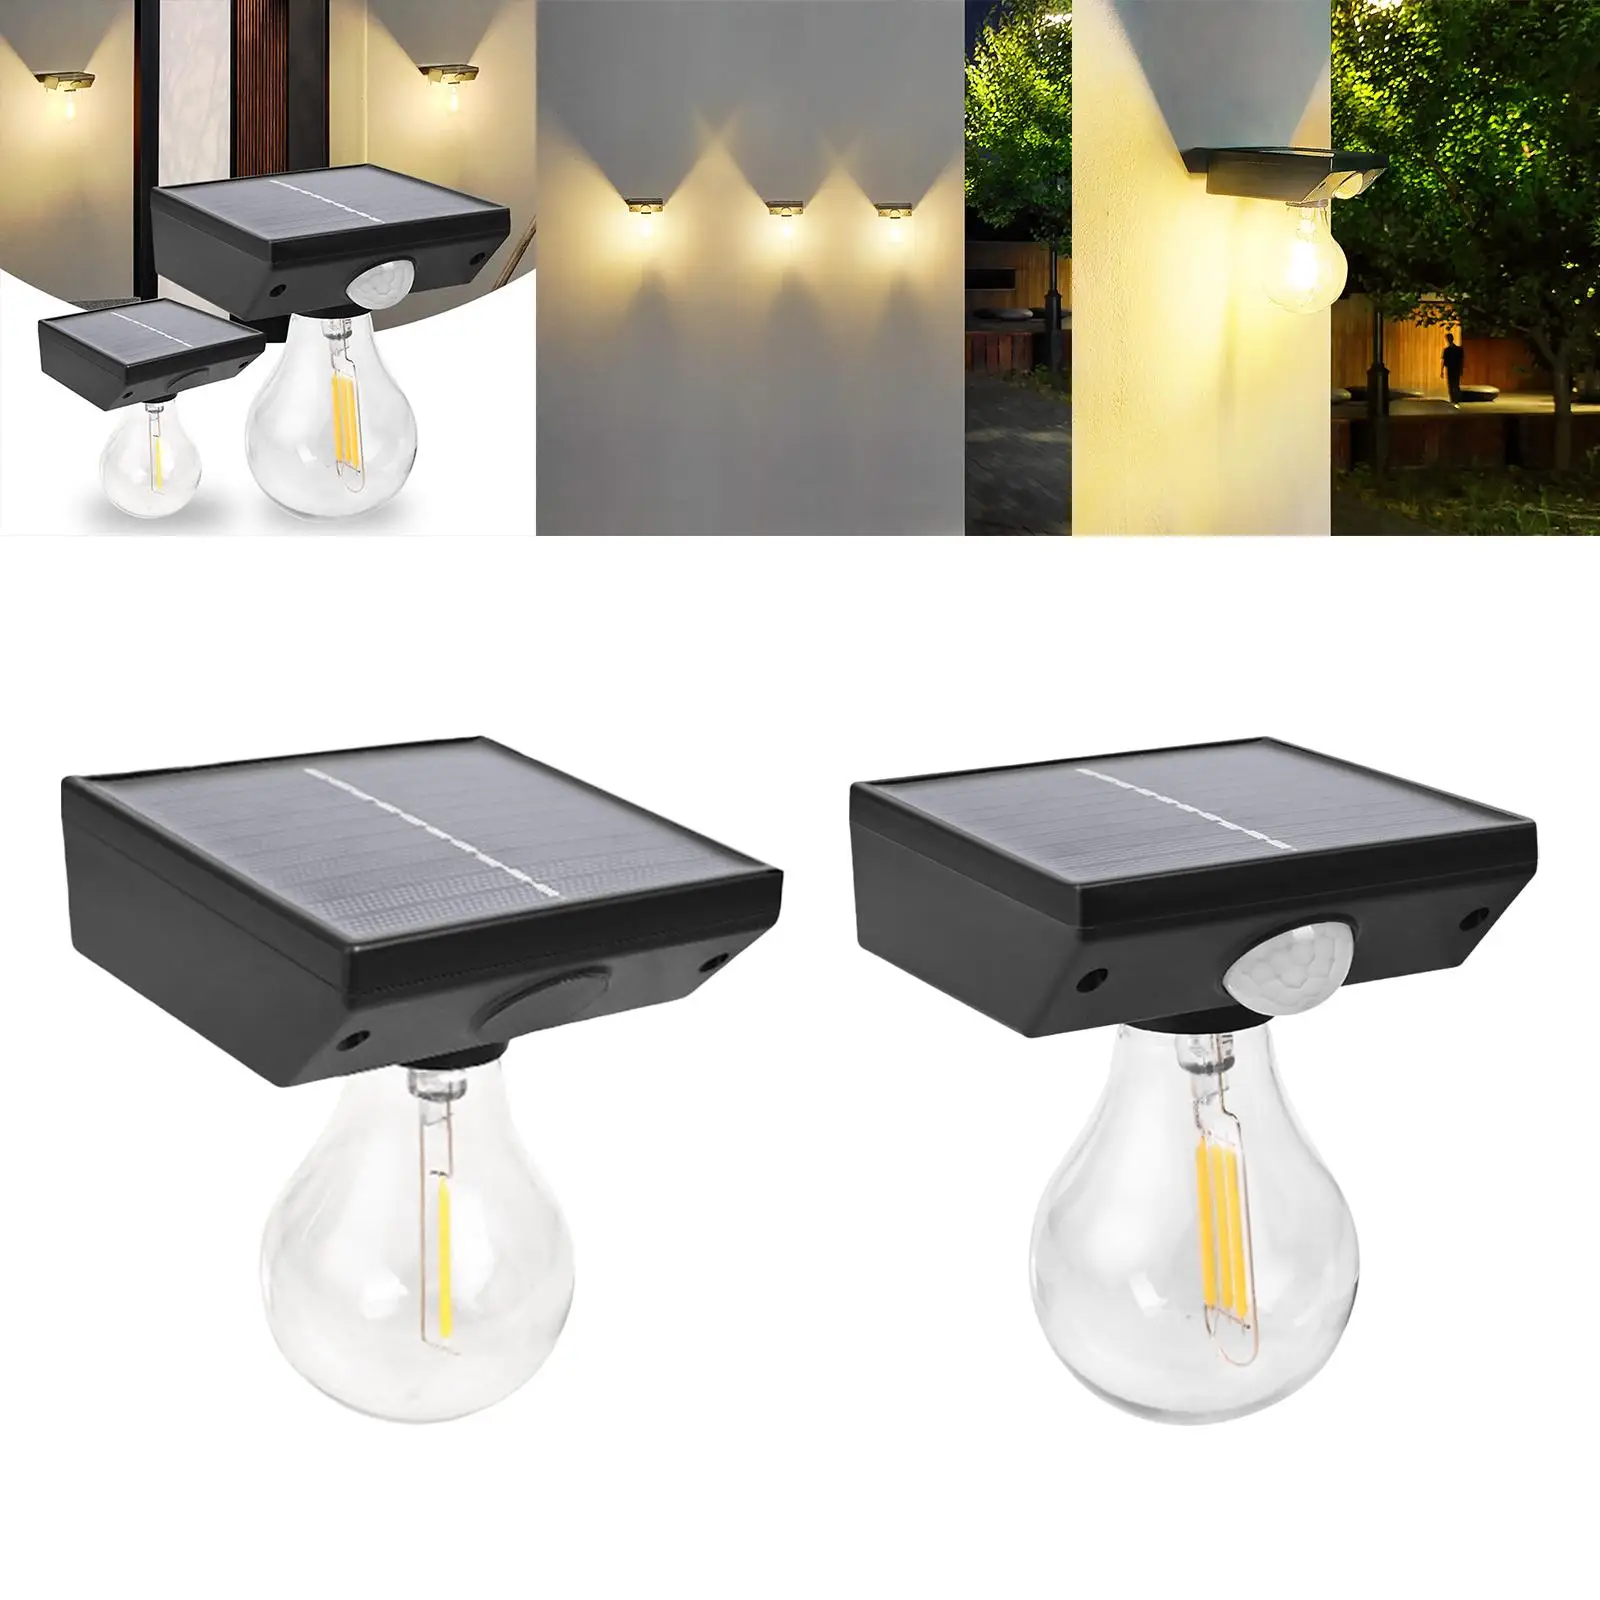 Waterproof Solar Lights Bulb Dusk to Dawn Accessories Powered Decorative Ball Bulb Lamp Lamps Bulbs for Fence Tent Hallway